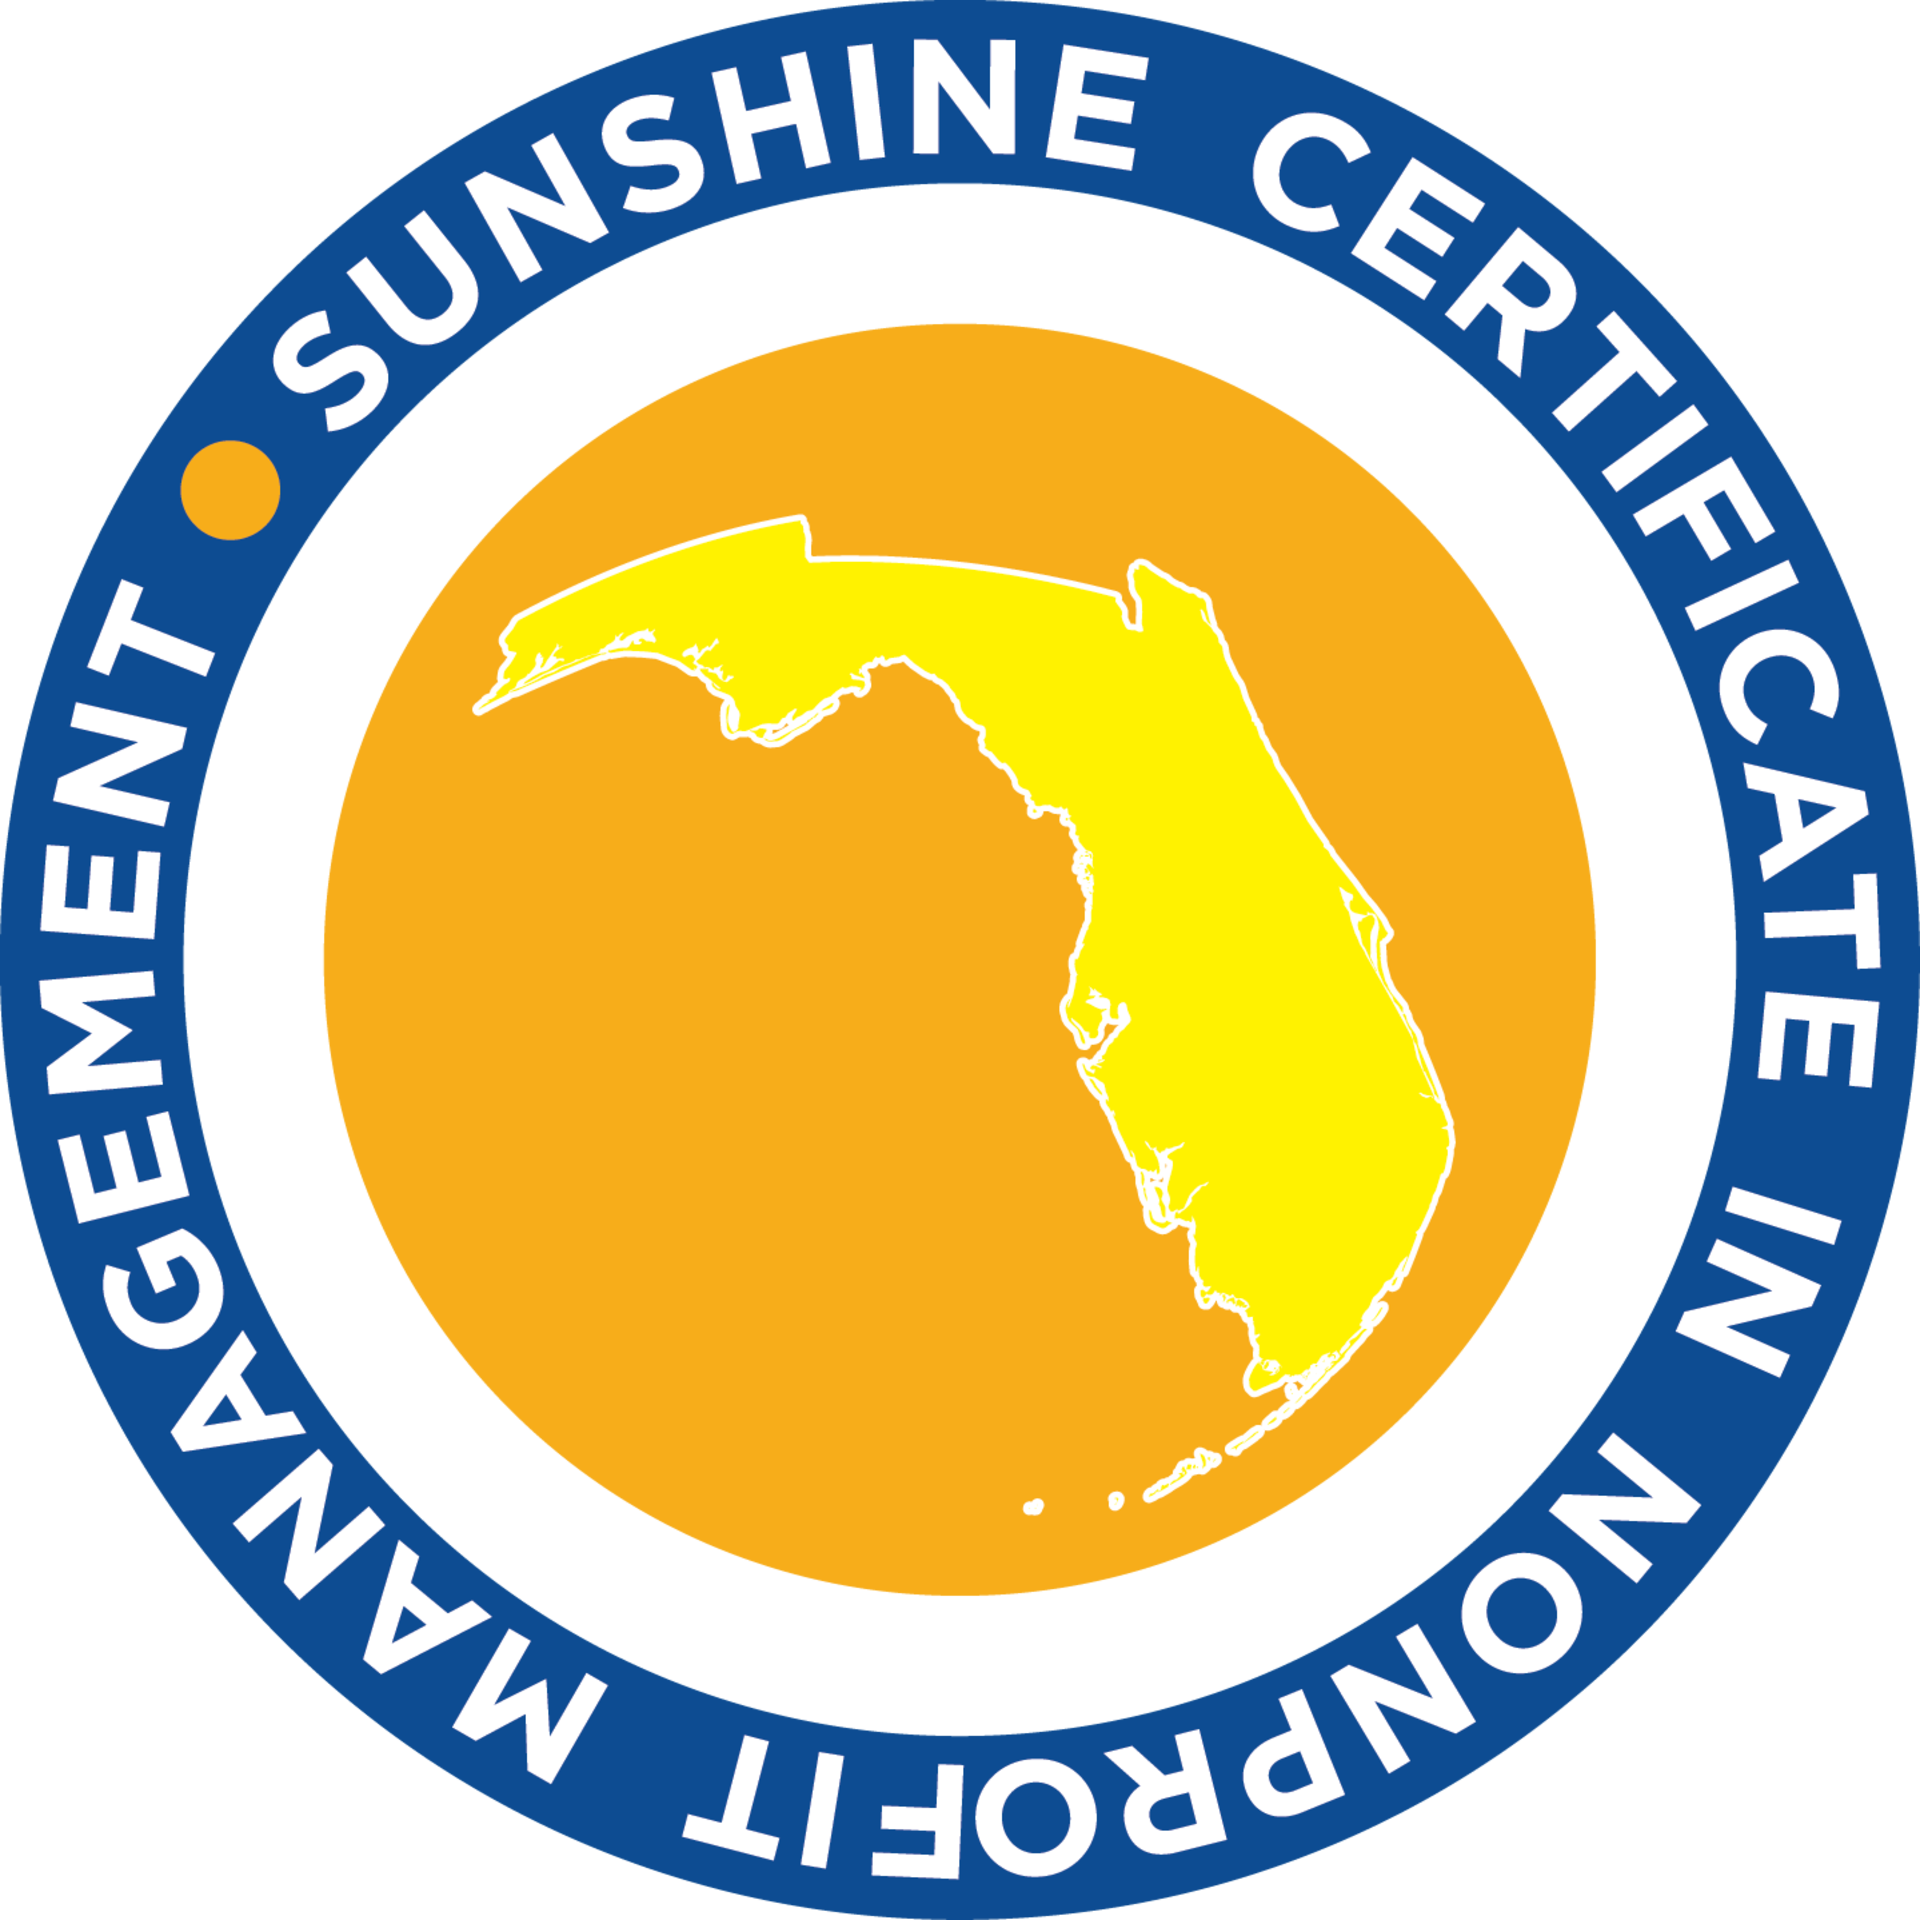  Florida Nonprofits’ Managing Technology Class of the Sunshine Certificate in...